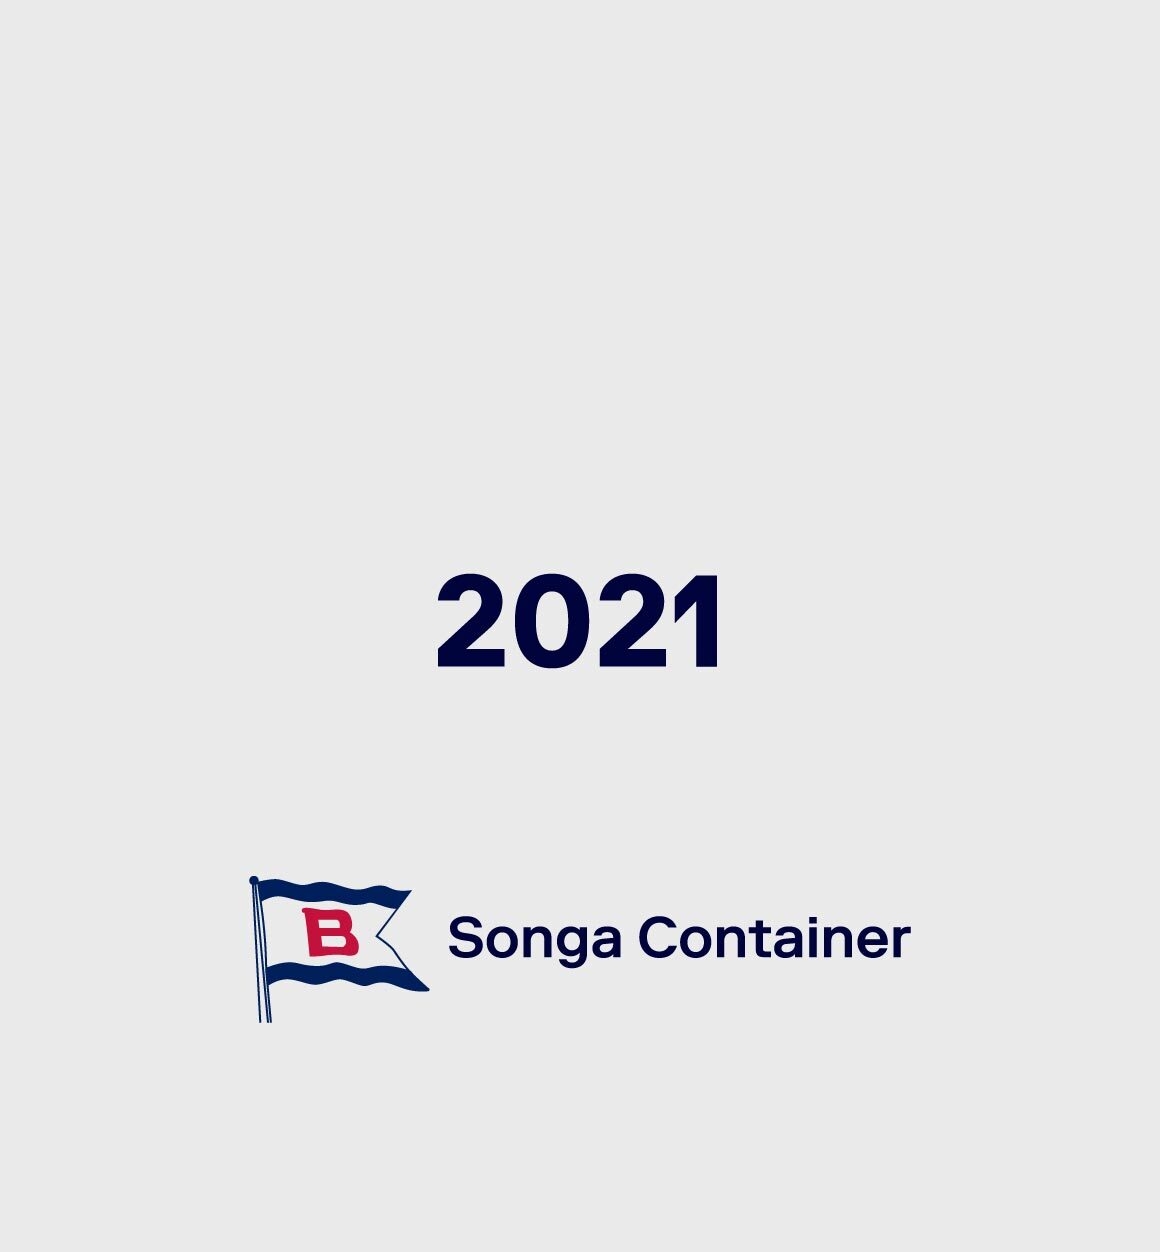 Songa Container 2021